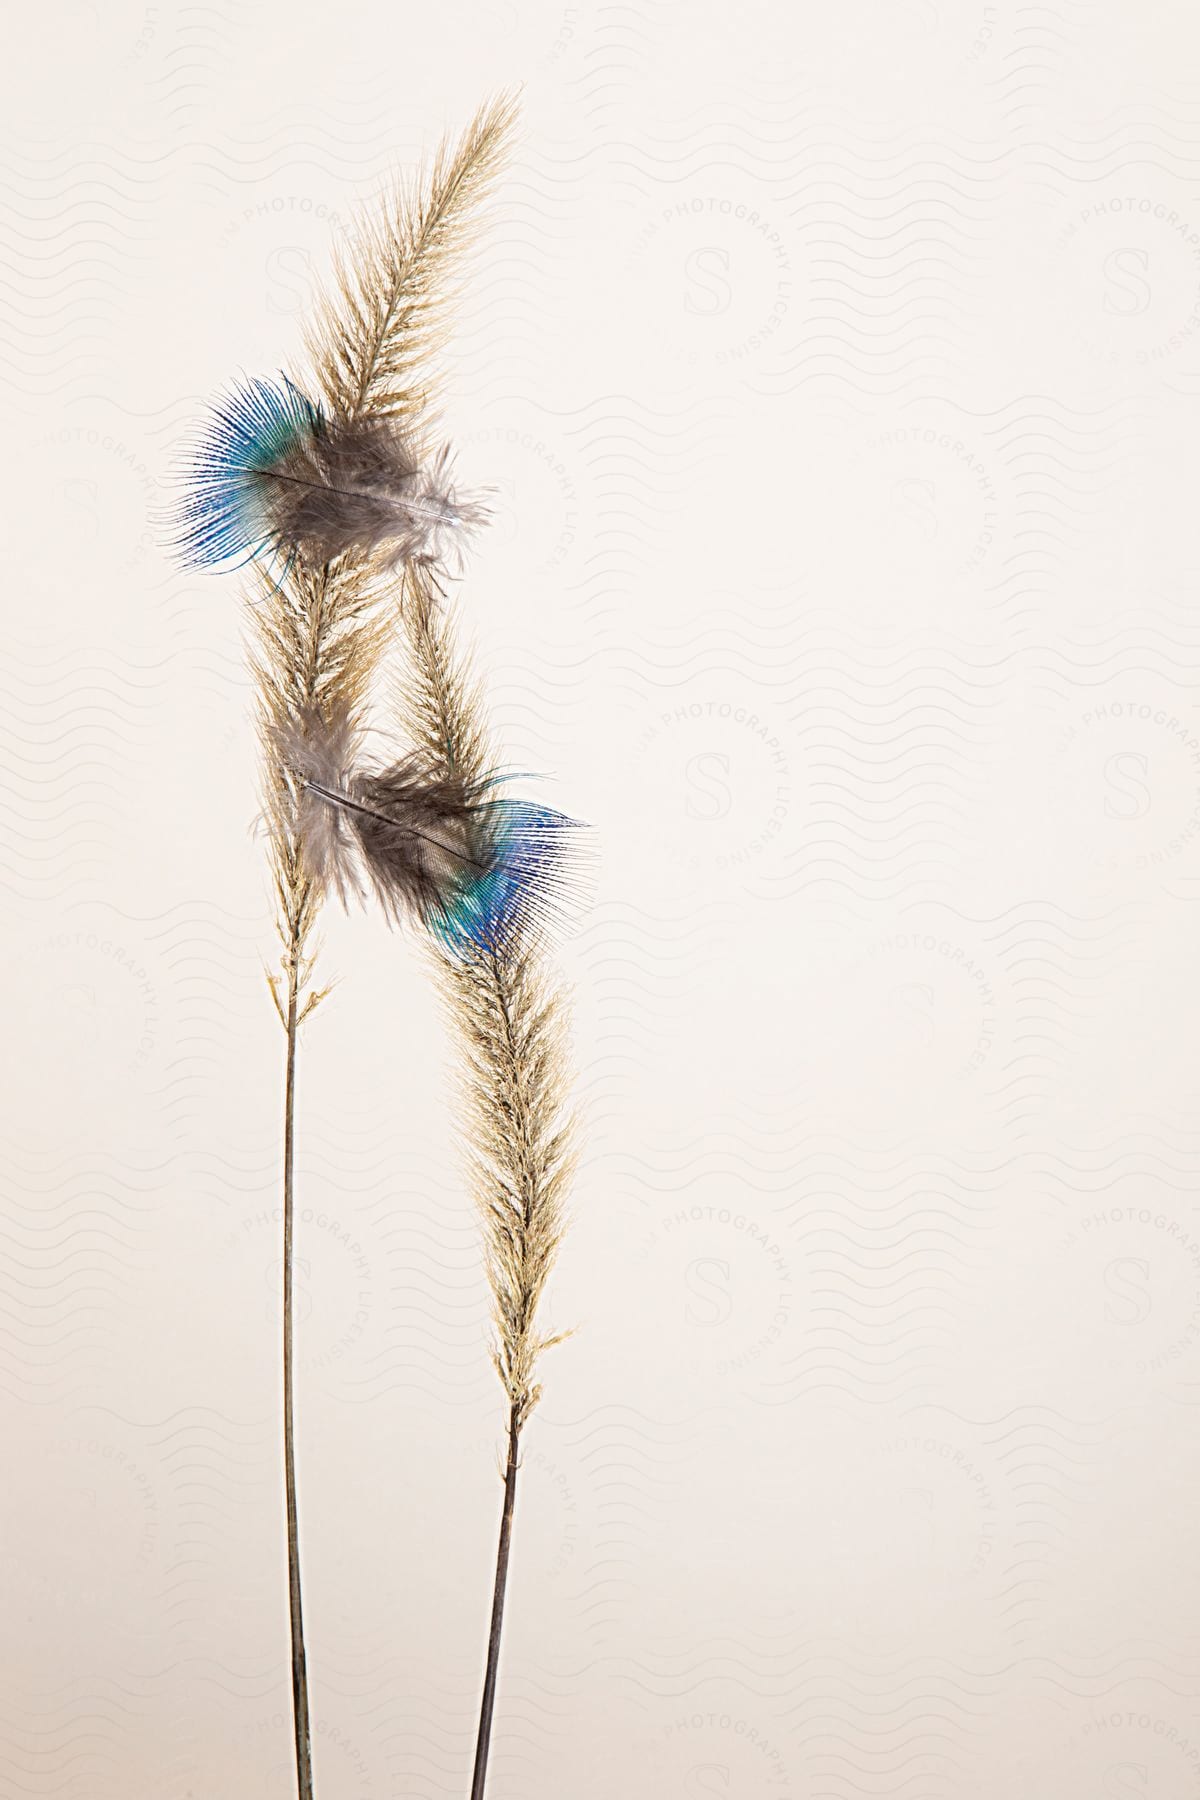 Wheat foliage in still life with two grayish and blue feathers connected on a white background